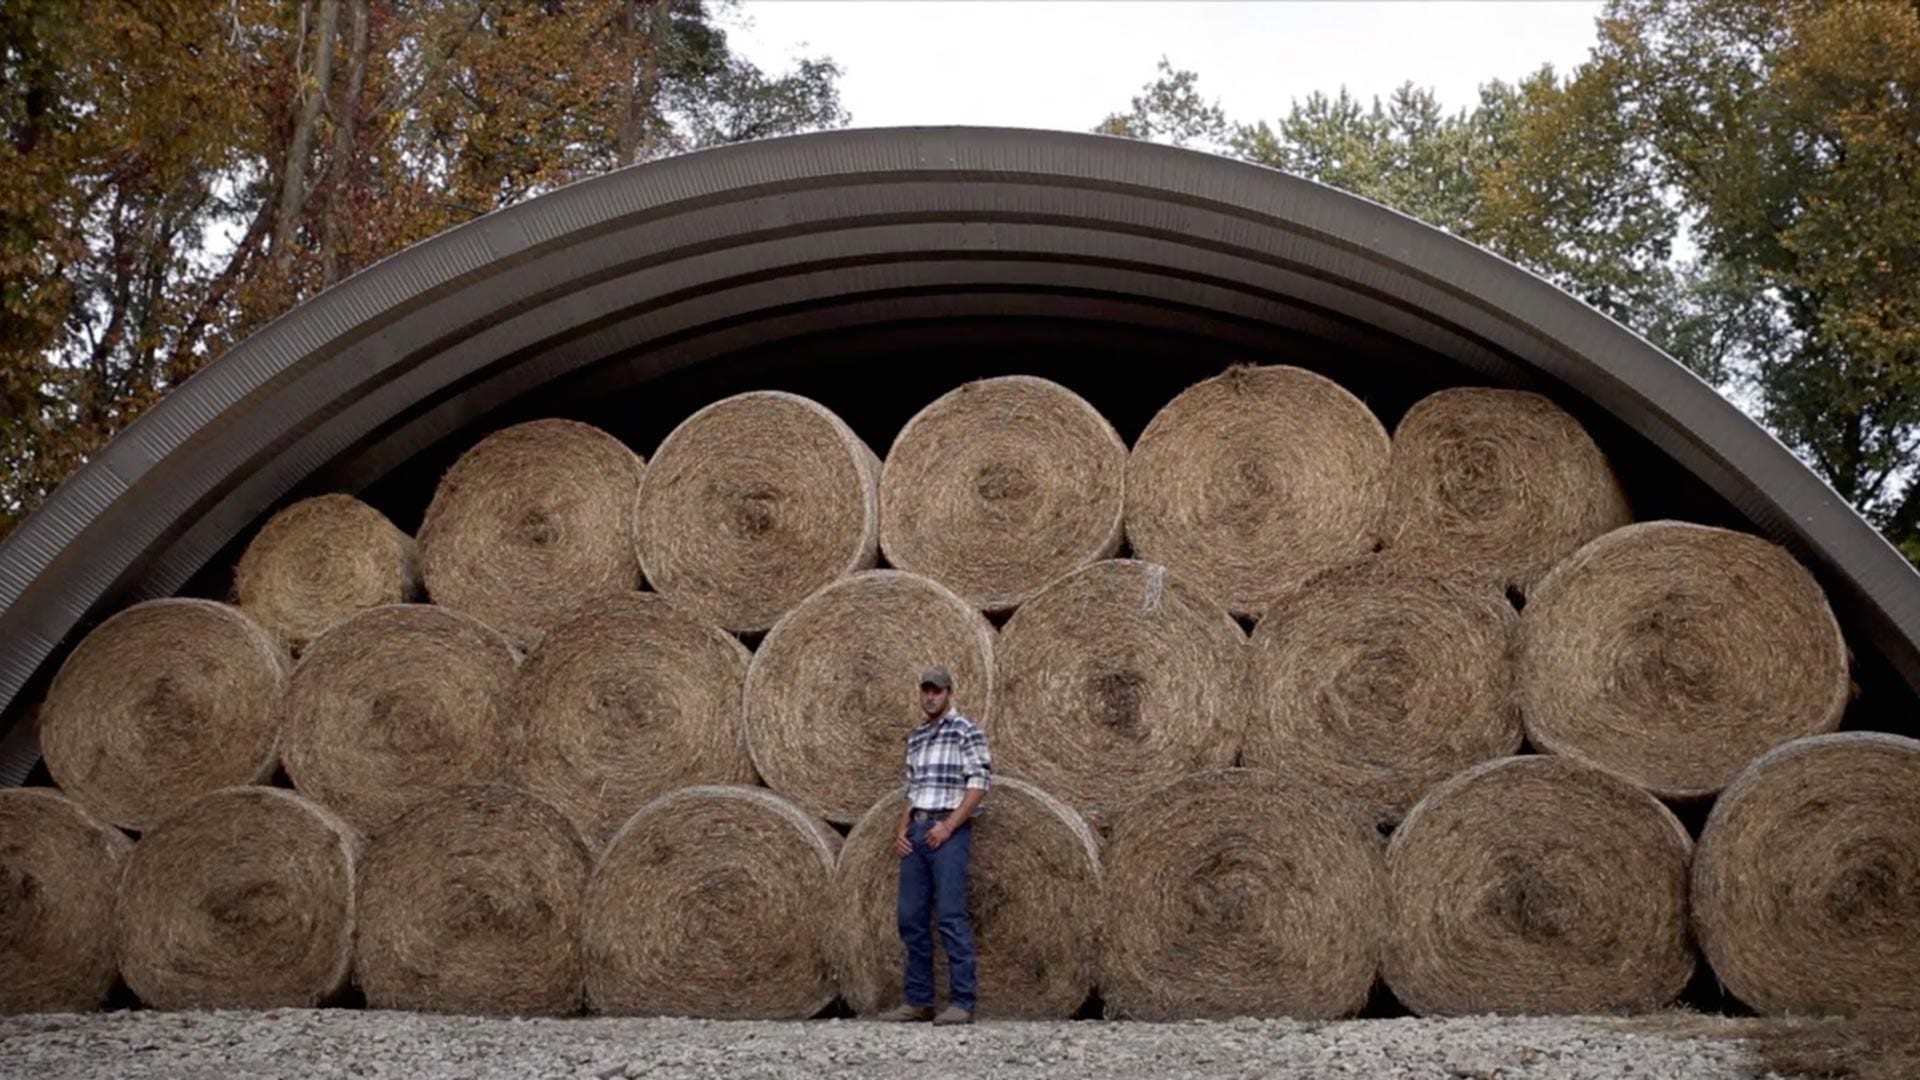 Peter Buttigieg standing in front of a hangar building filled with hay bales